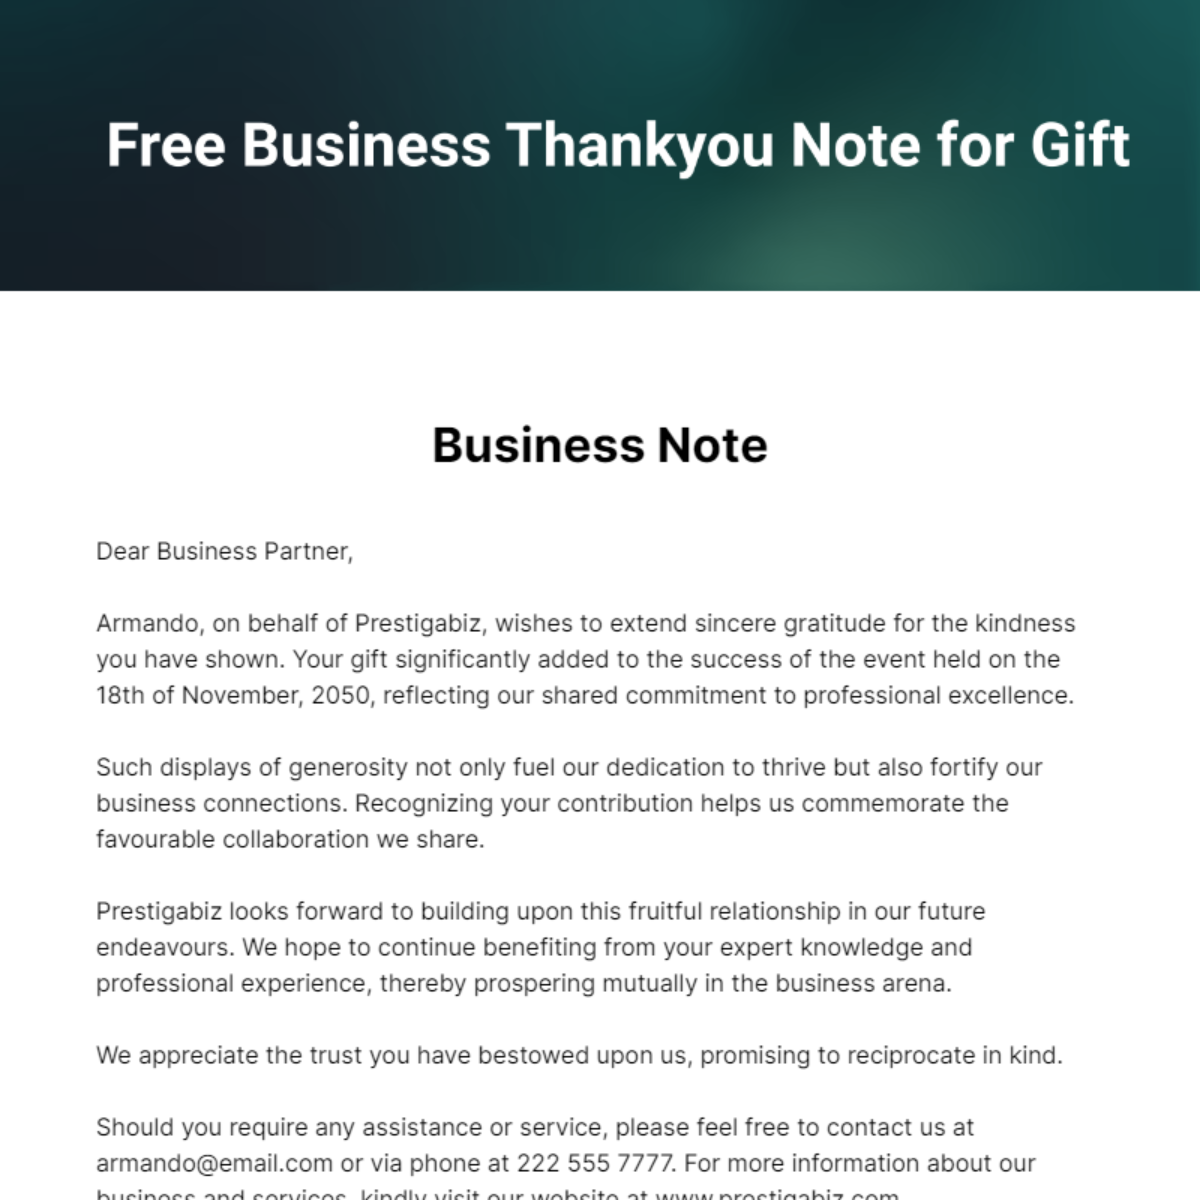 Business Thankyou Note for Gift Template